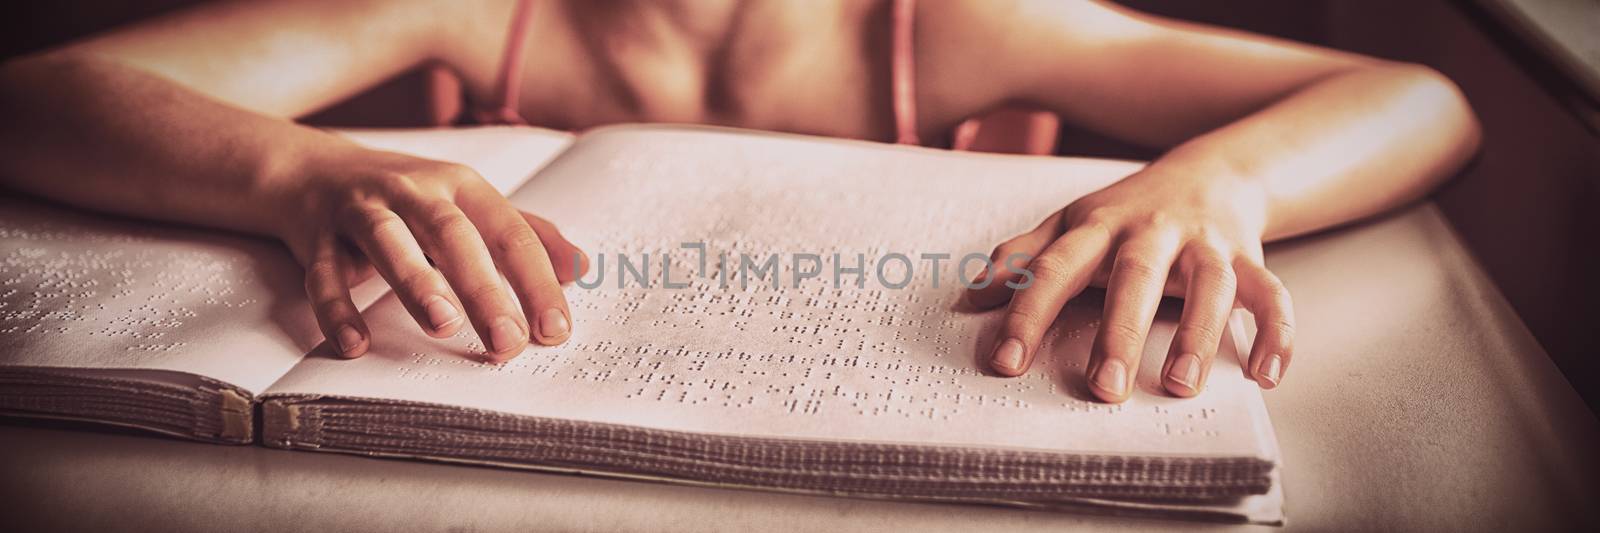 Blind girl using both hands to read braille by Wavebreakmedia